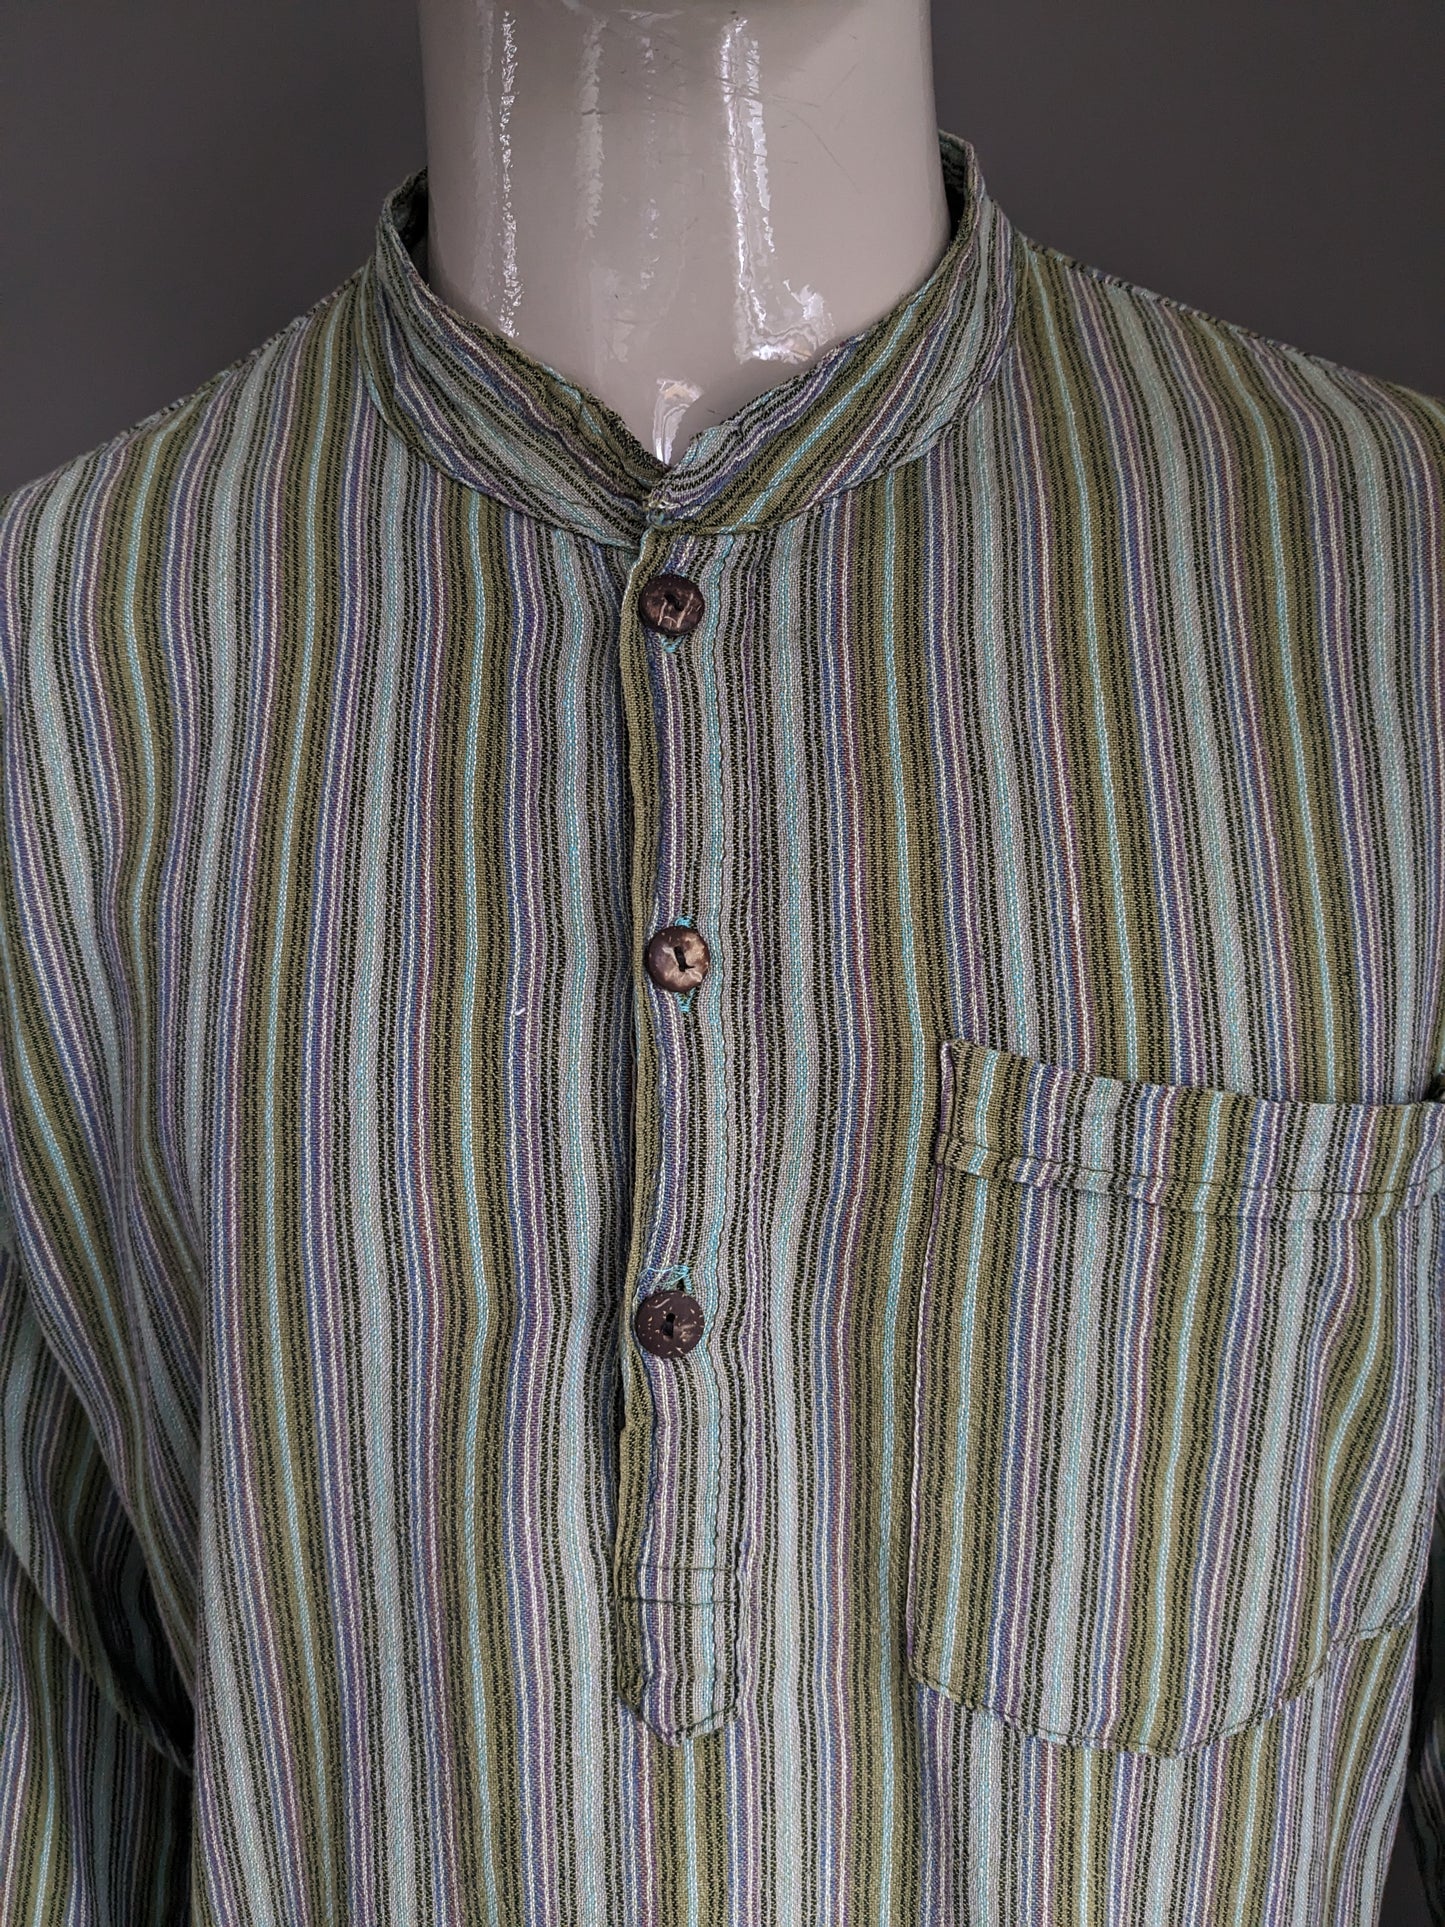 Vintage polo sweater / shirt with raised / farmers / mao collar. Green purple brown blue striped with bag. Size XL.